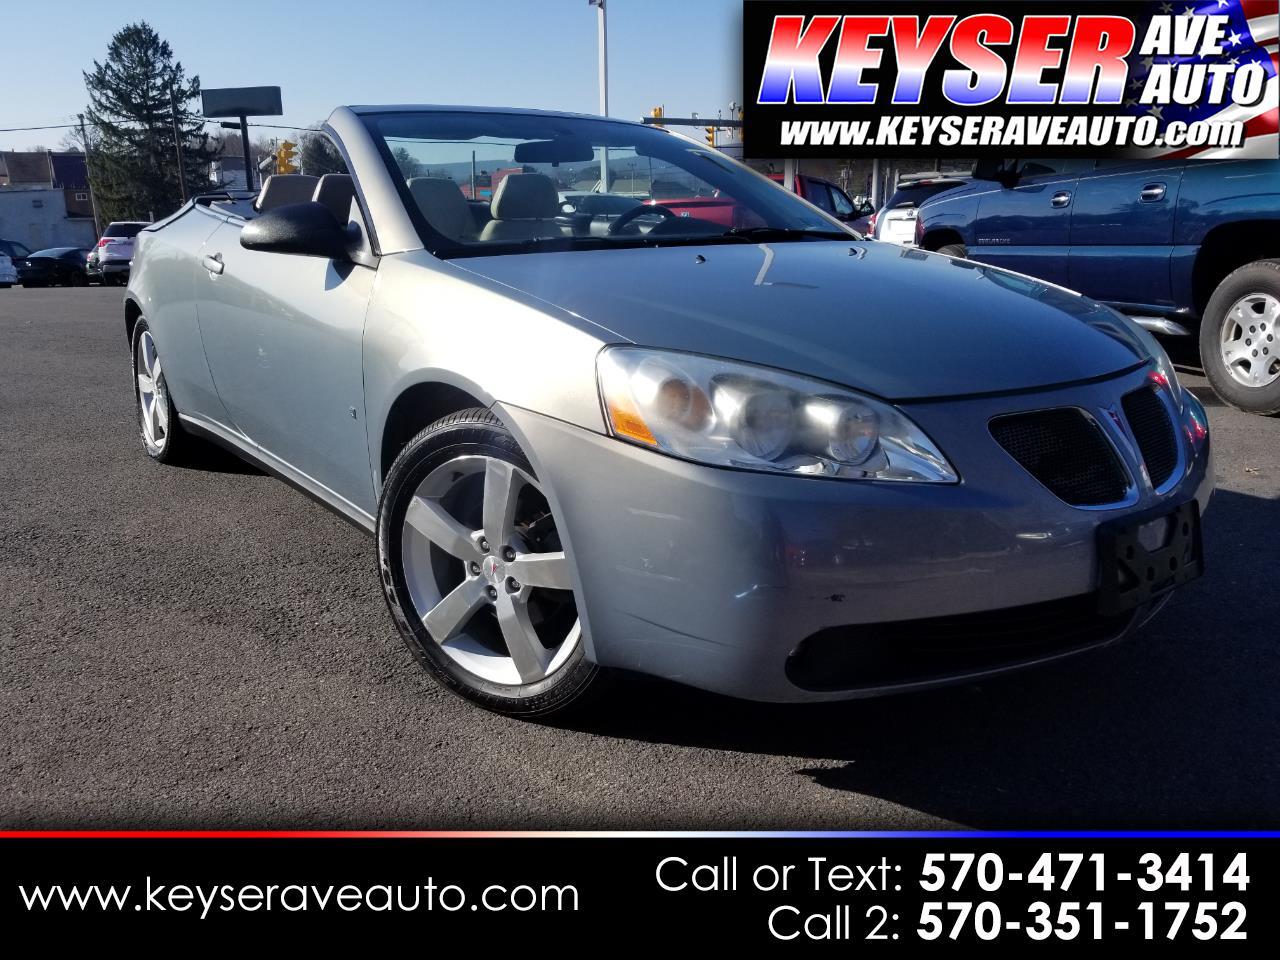 Used 2007 Pontiac G6 Gt Convertible For Sale In Scranton Pa